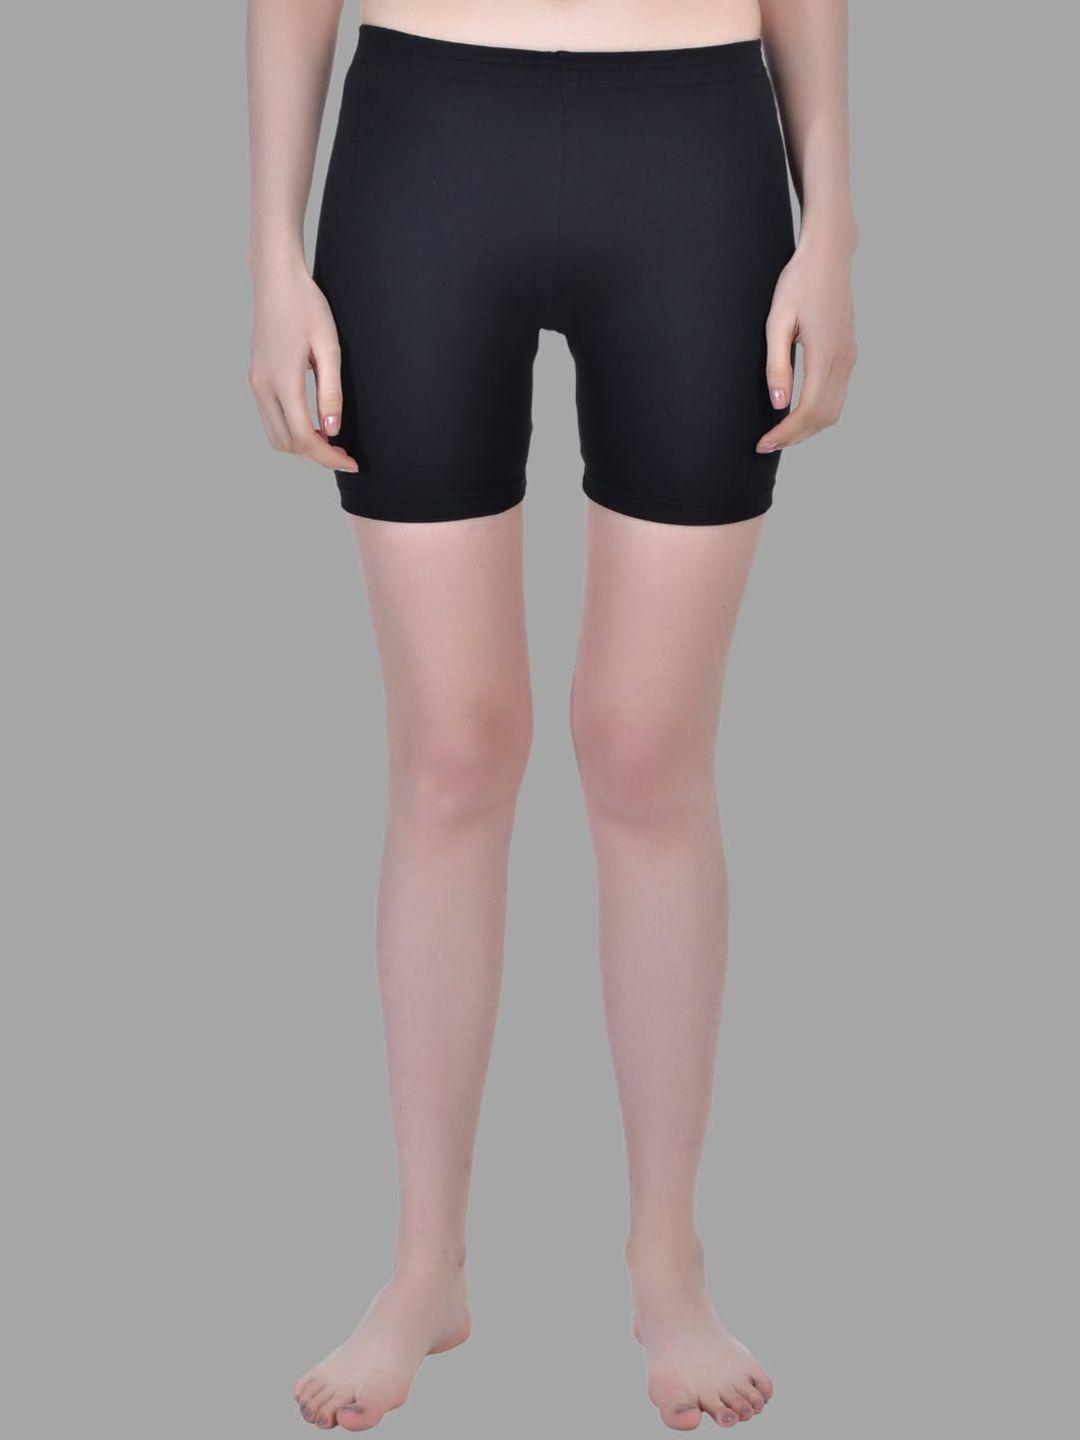 aimly-women-skinny-fit-cycling-sports-shorts